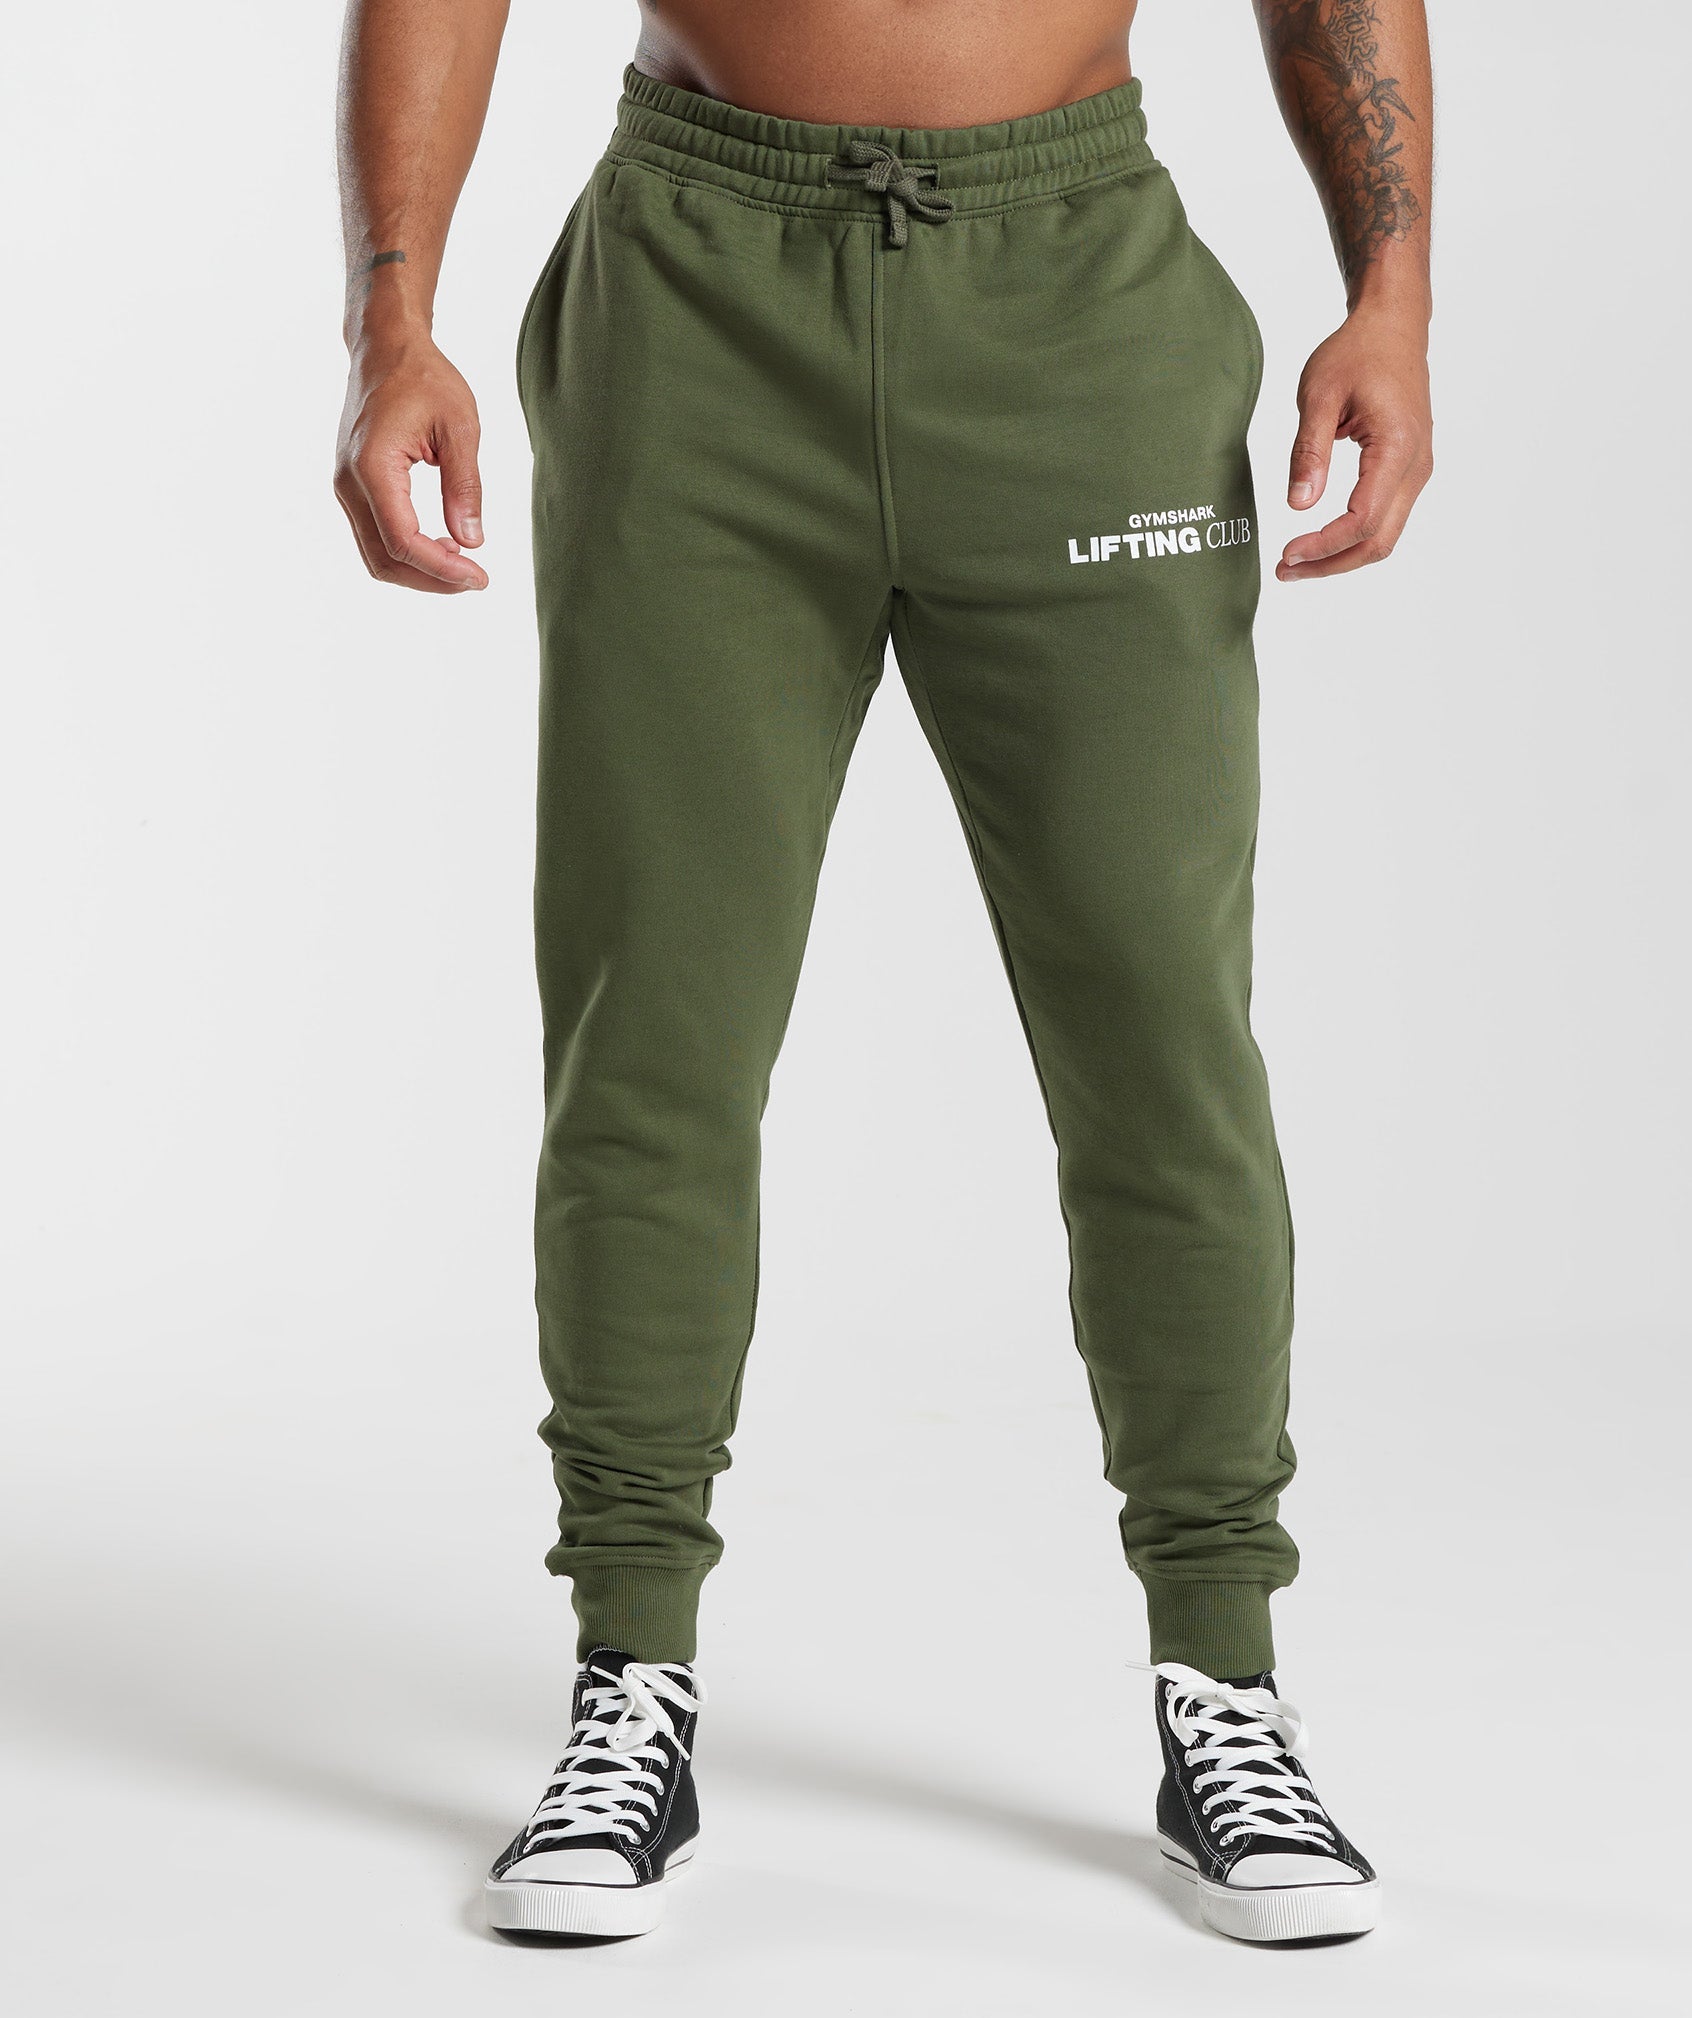 Social Club Joggers in Core Olive - view 1